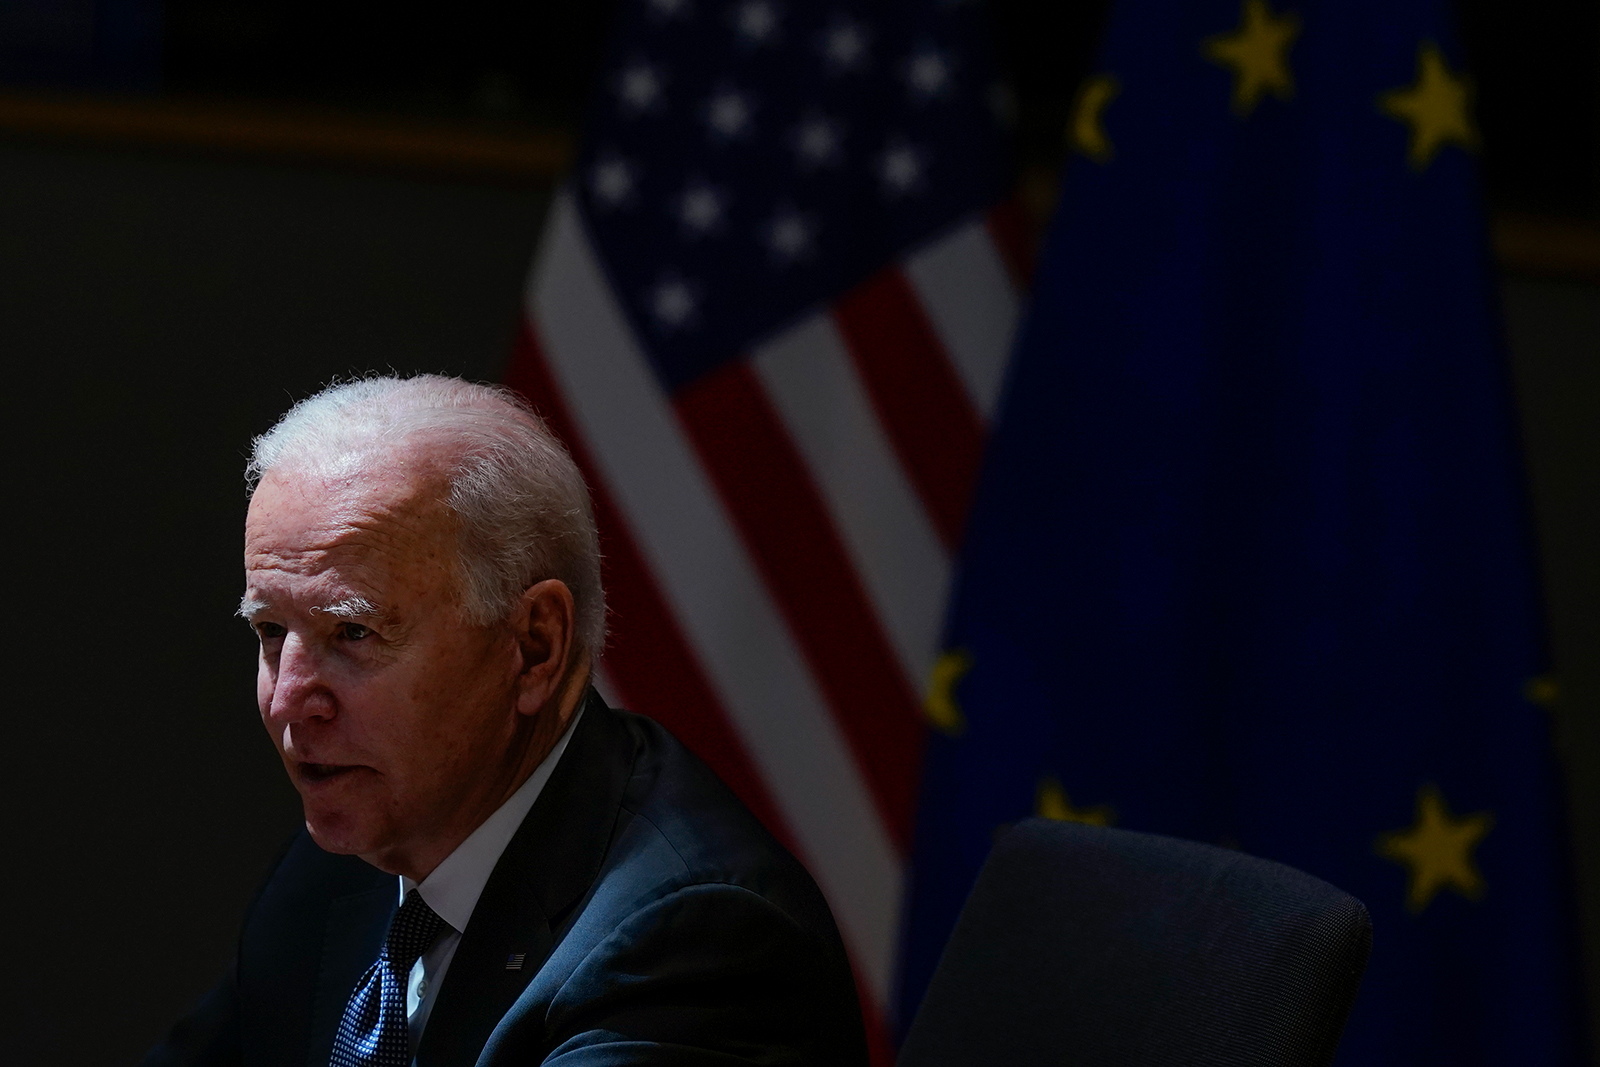 President Joe Biden speaks during the United States-European Union Summit at the European Council in Brussels, Tuesday, June 15.